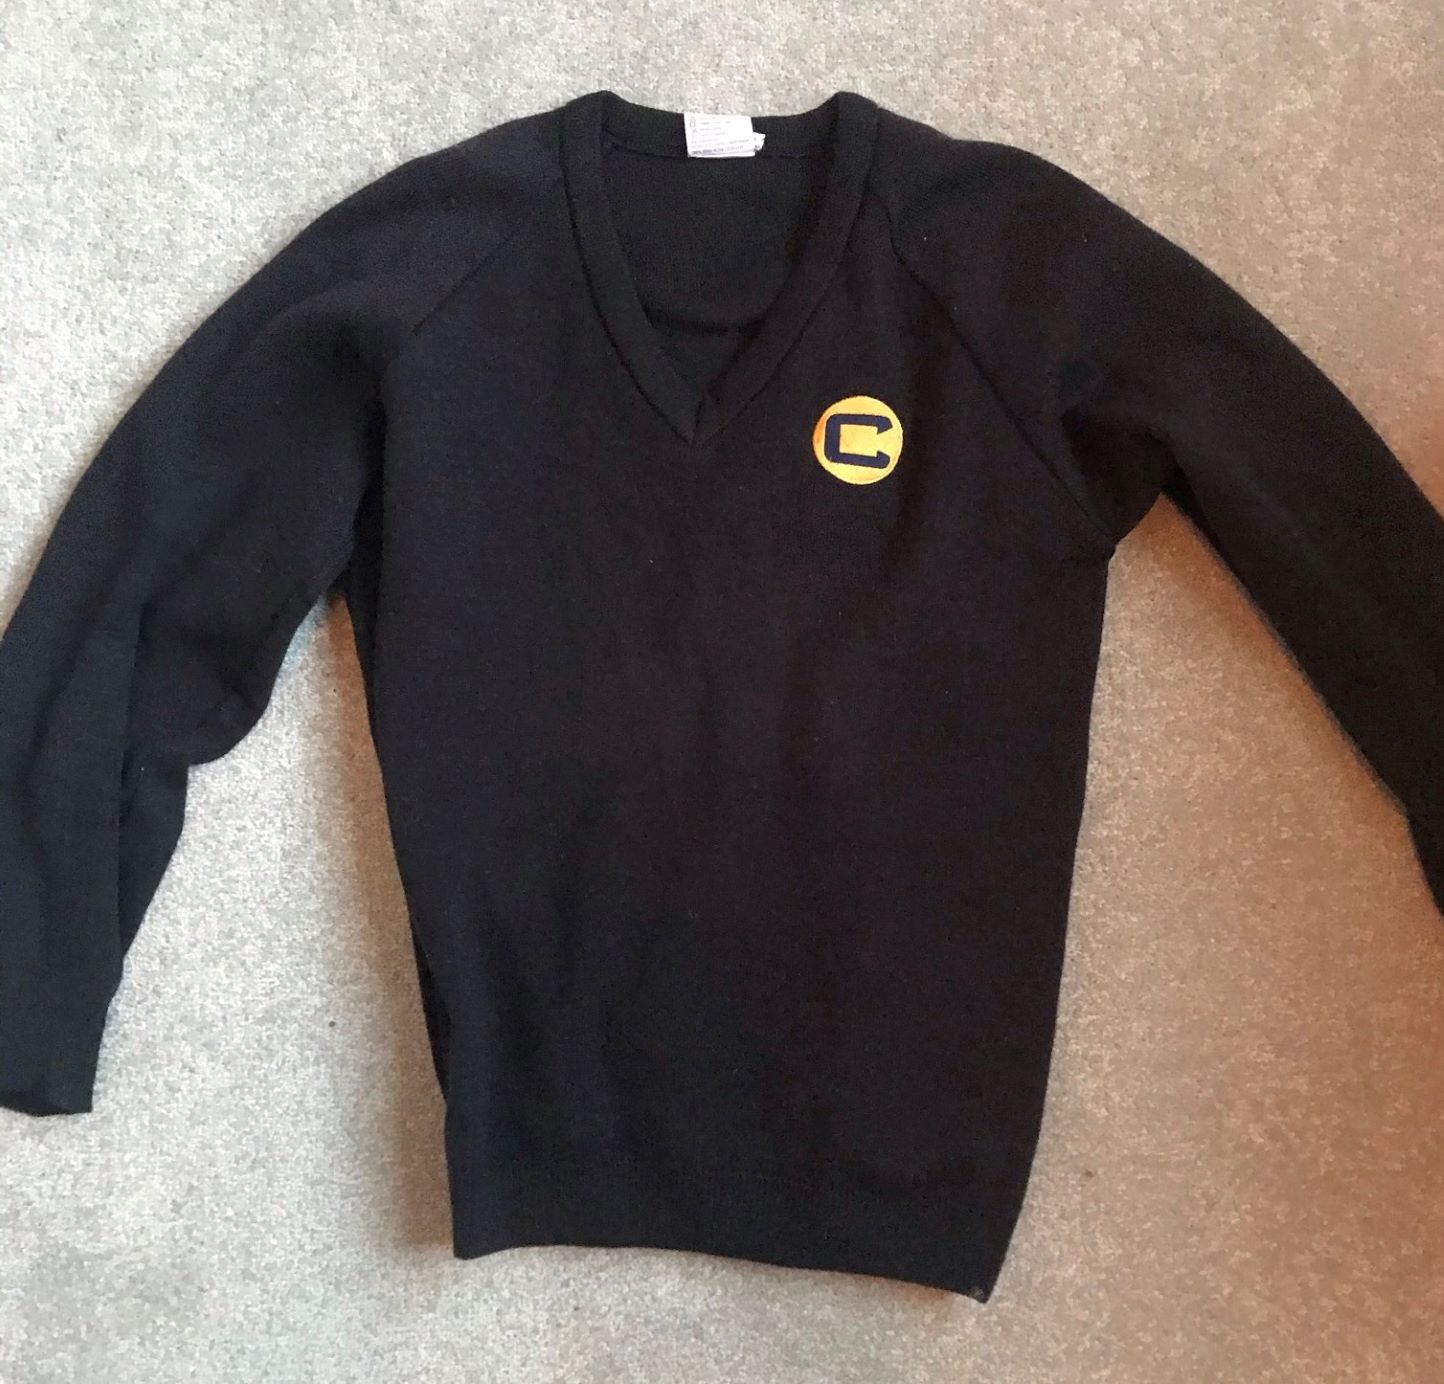 Charter North Jumper: Size 34 marked